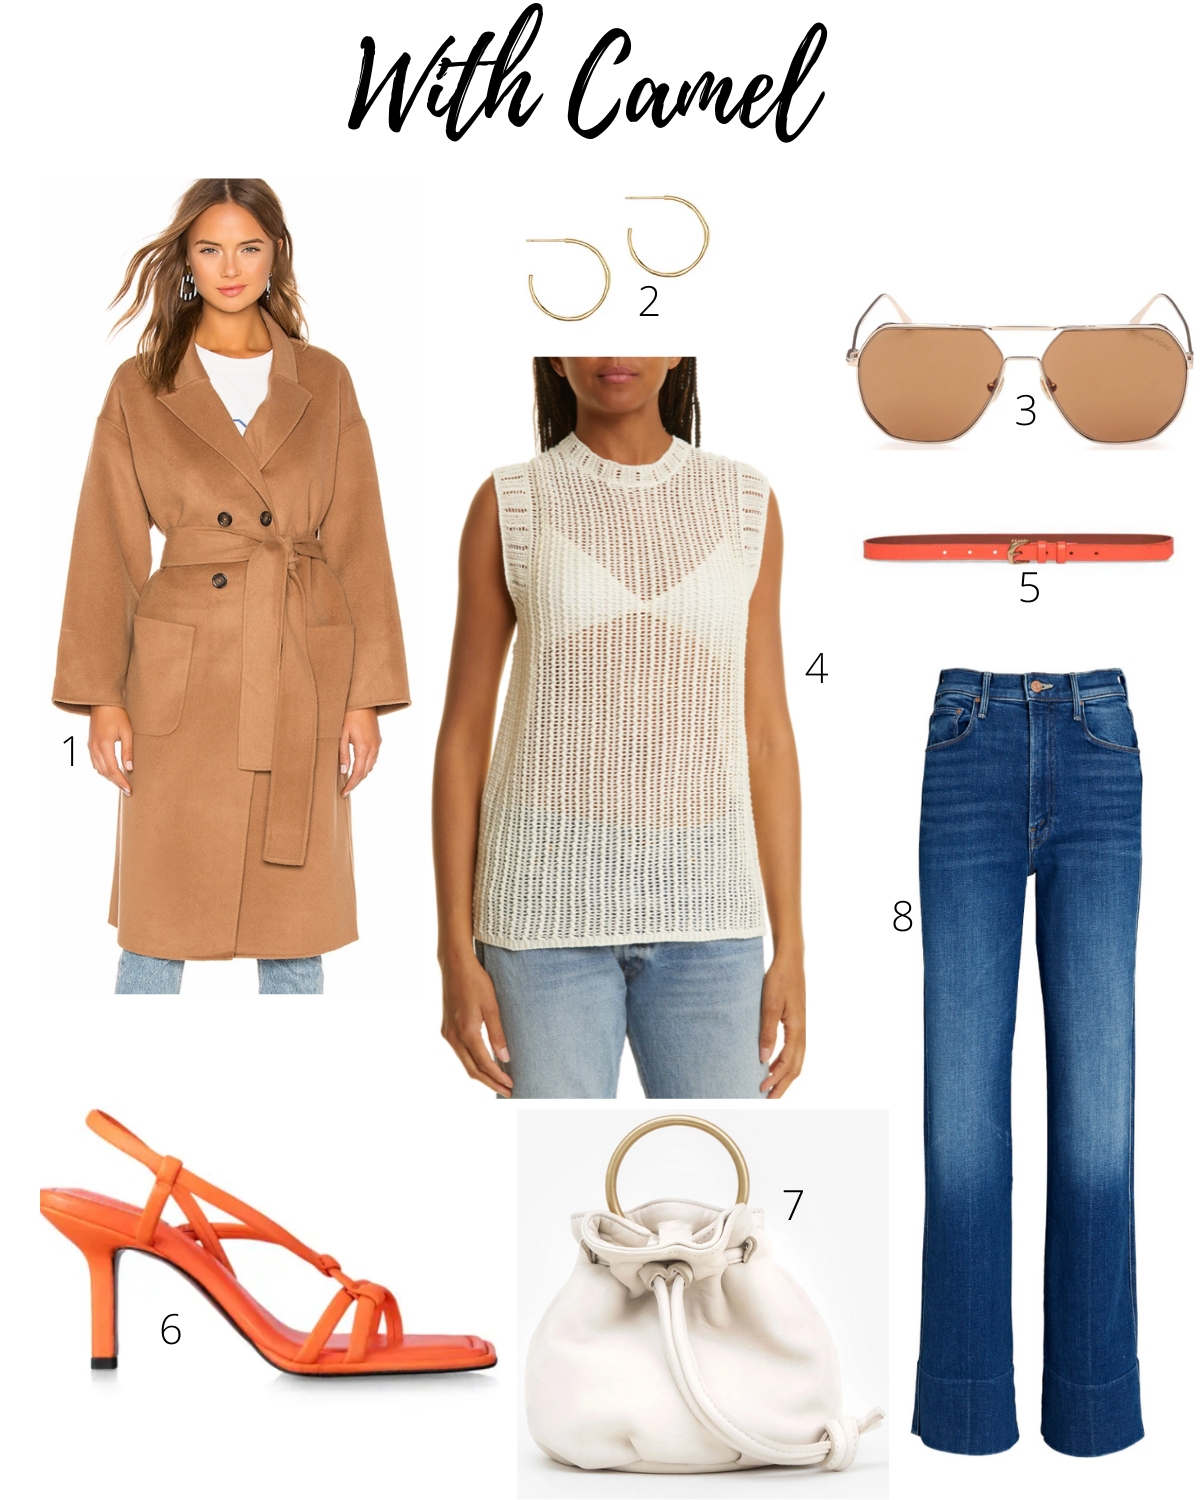 A style board featuring the Frame sandals in orange crush, Anine Bing camel Dylan coat, and MOTHER jeans.